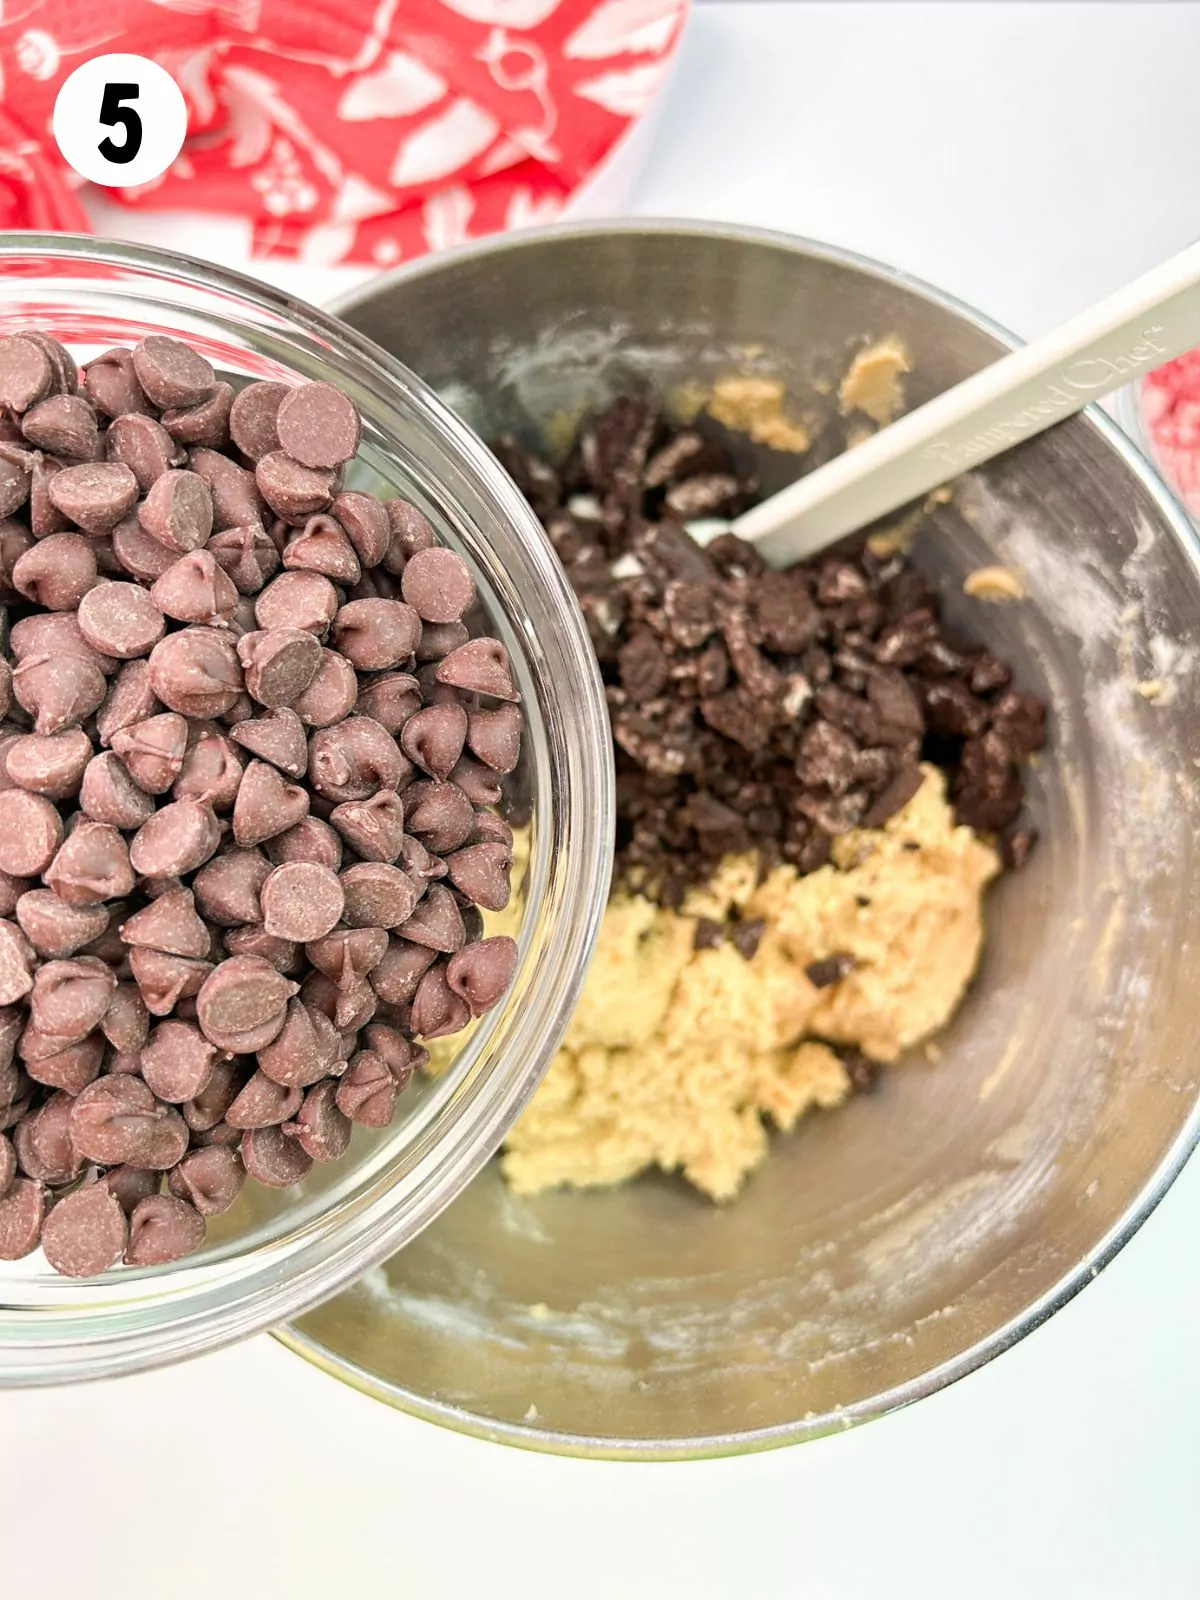 chocolate chips in small bowl being held over cookie dough batter.